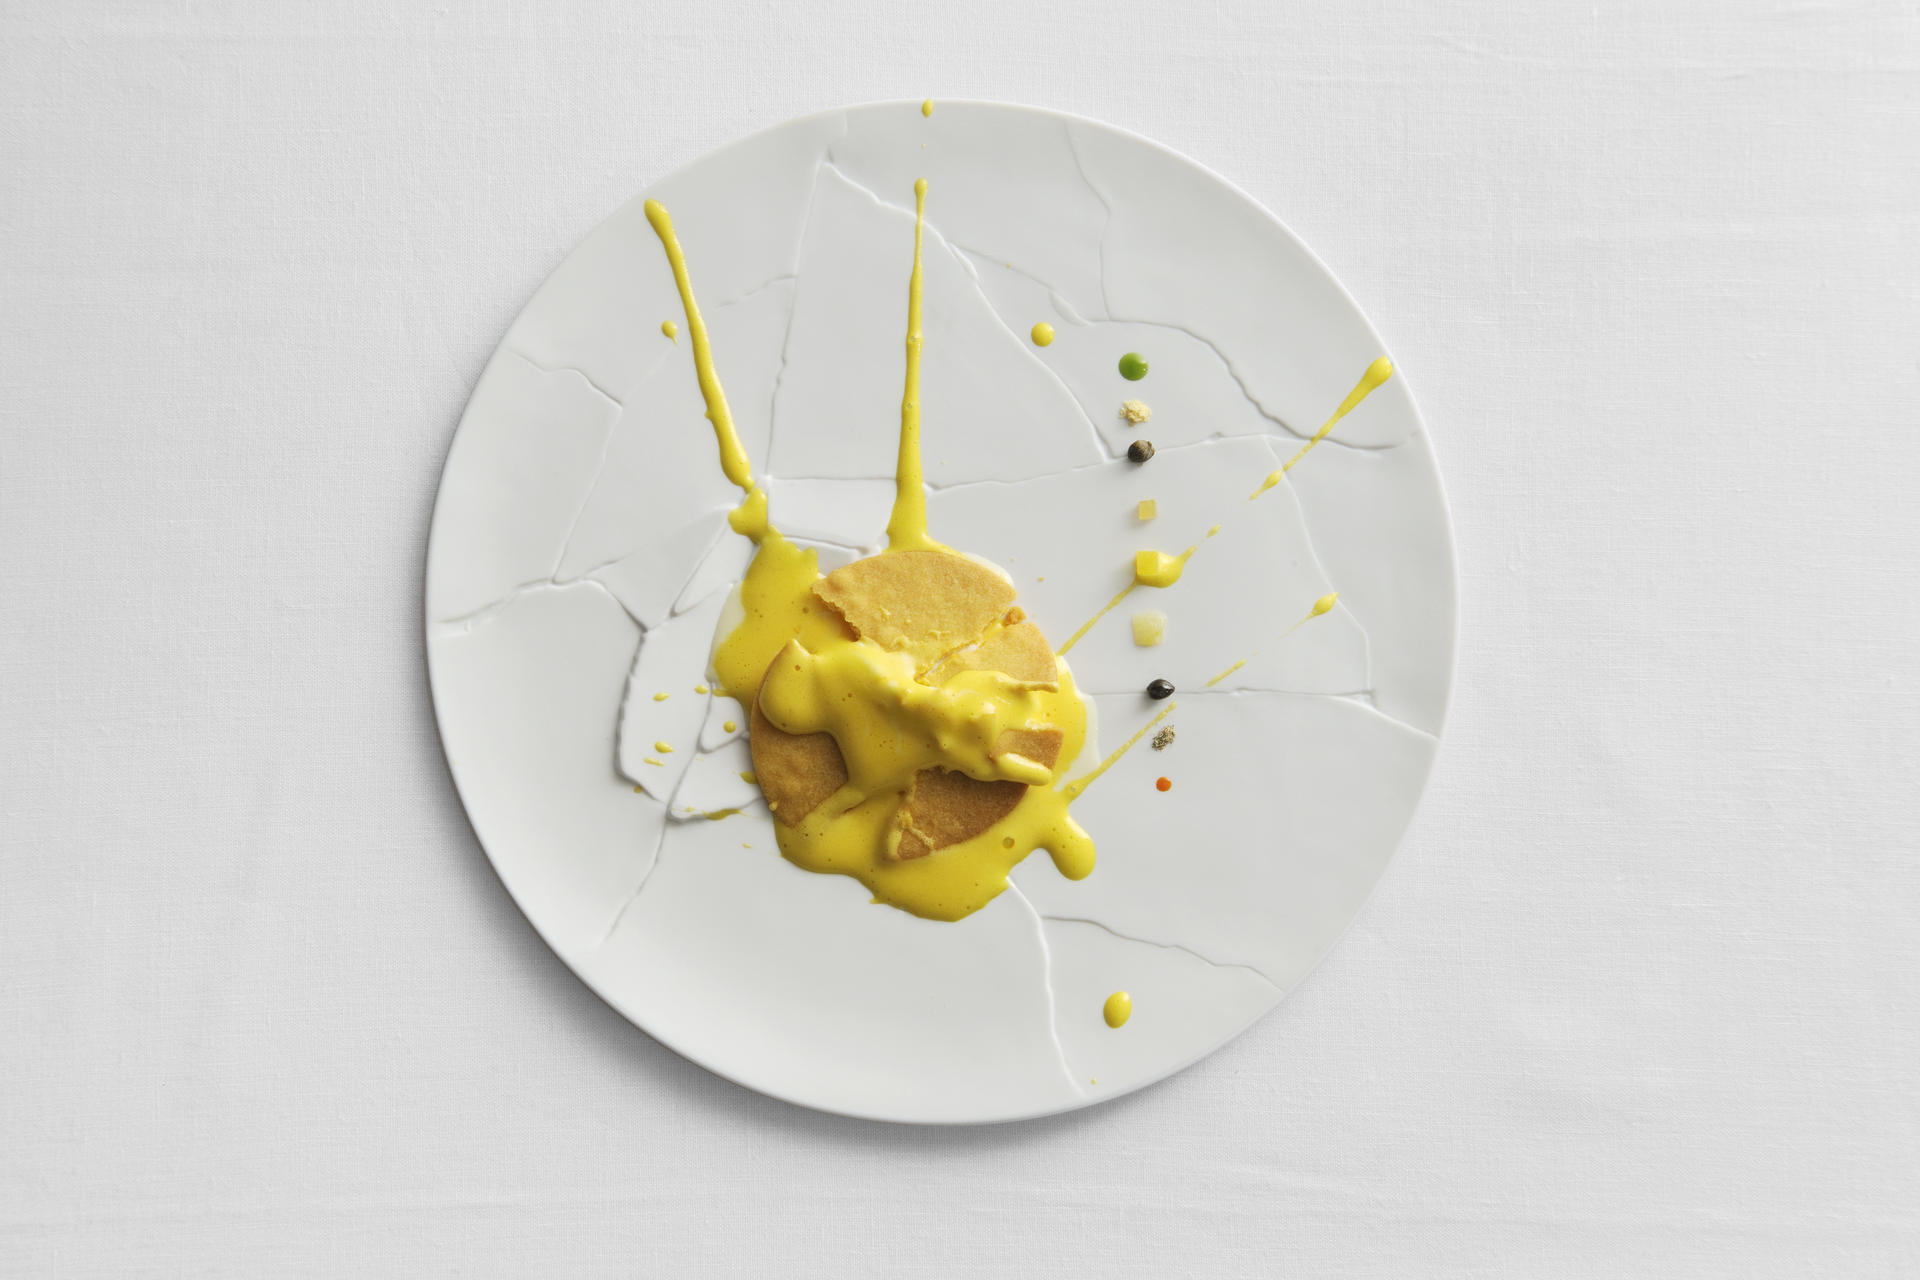 The 'oops I dropped the lemon tart' dessert from renowned chef Massimo Bottura. Photography: Paolo Terzi